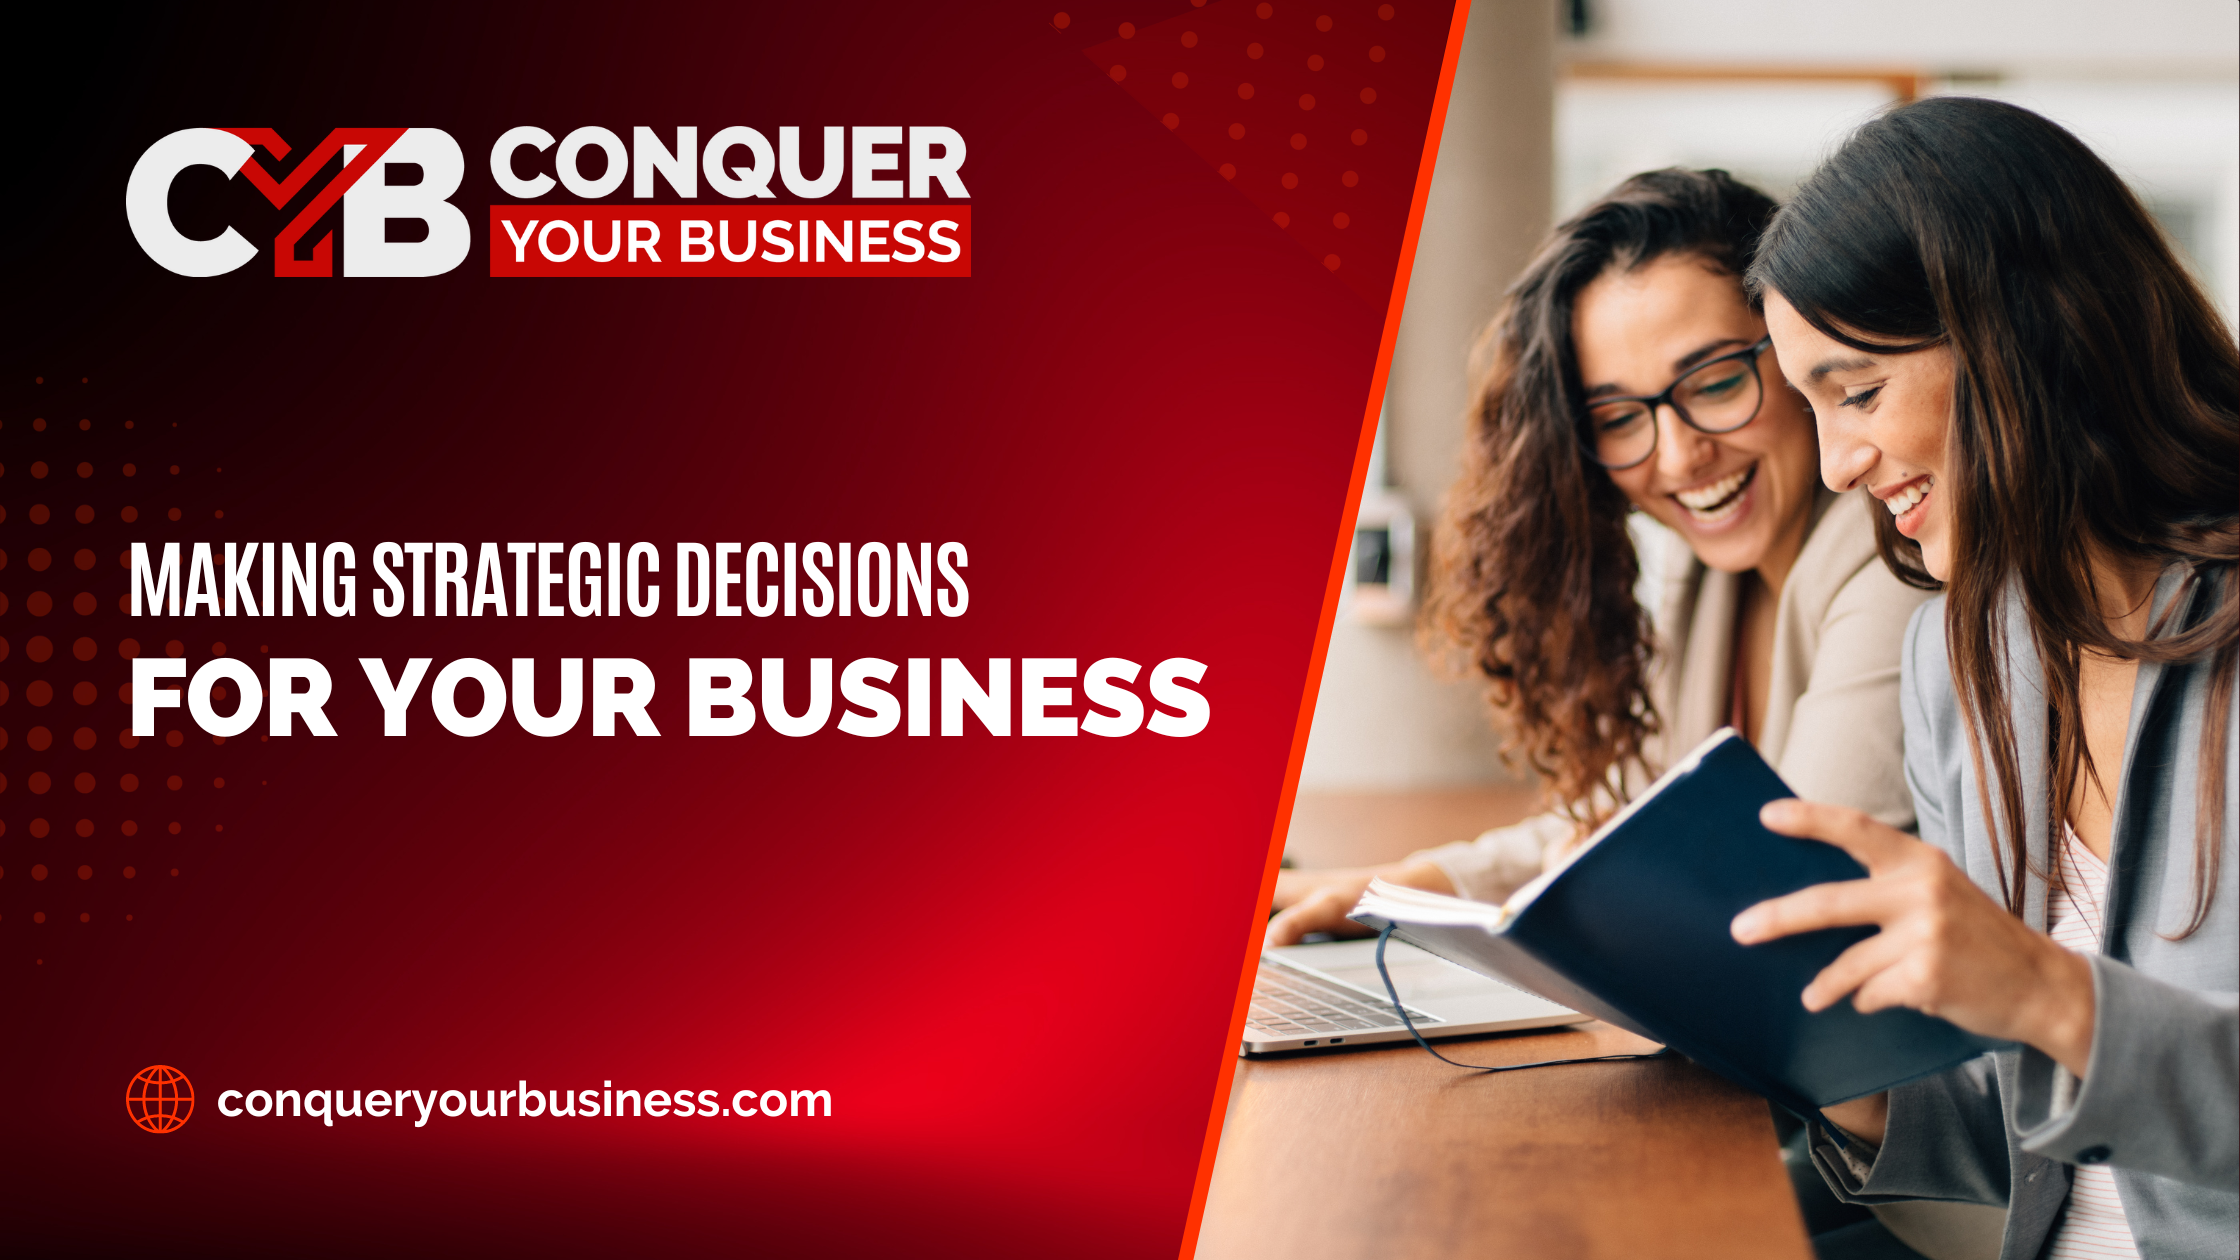 Blog header image for blog titled Making Strategic Decisions For Your Business, with photo of two women having a business meeting.